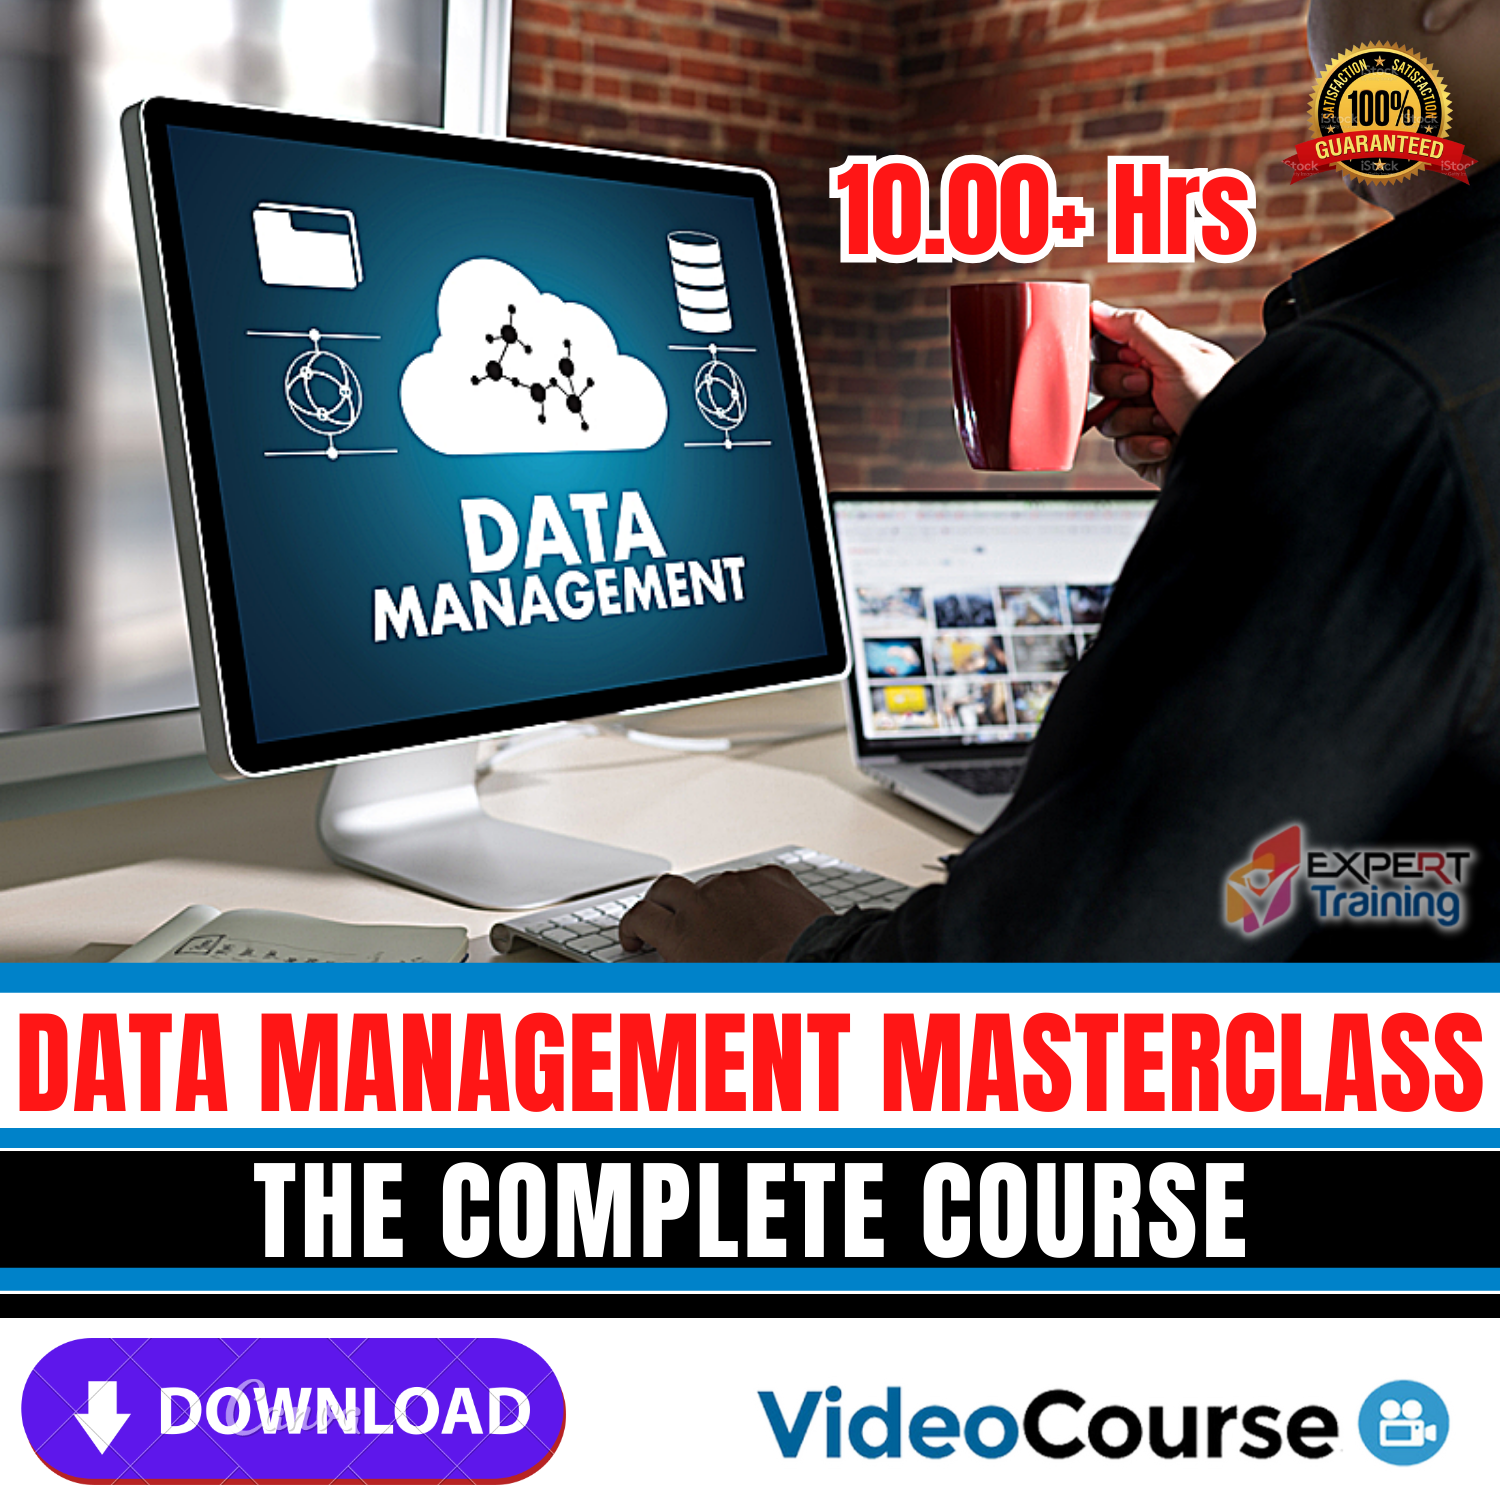 Data Management Masterclass The Complete Course